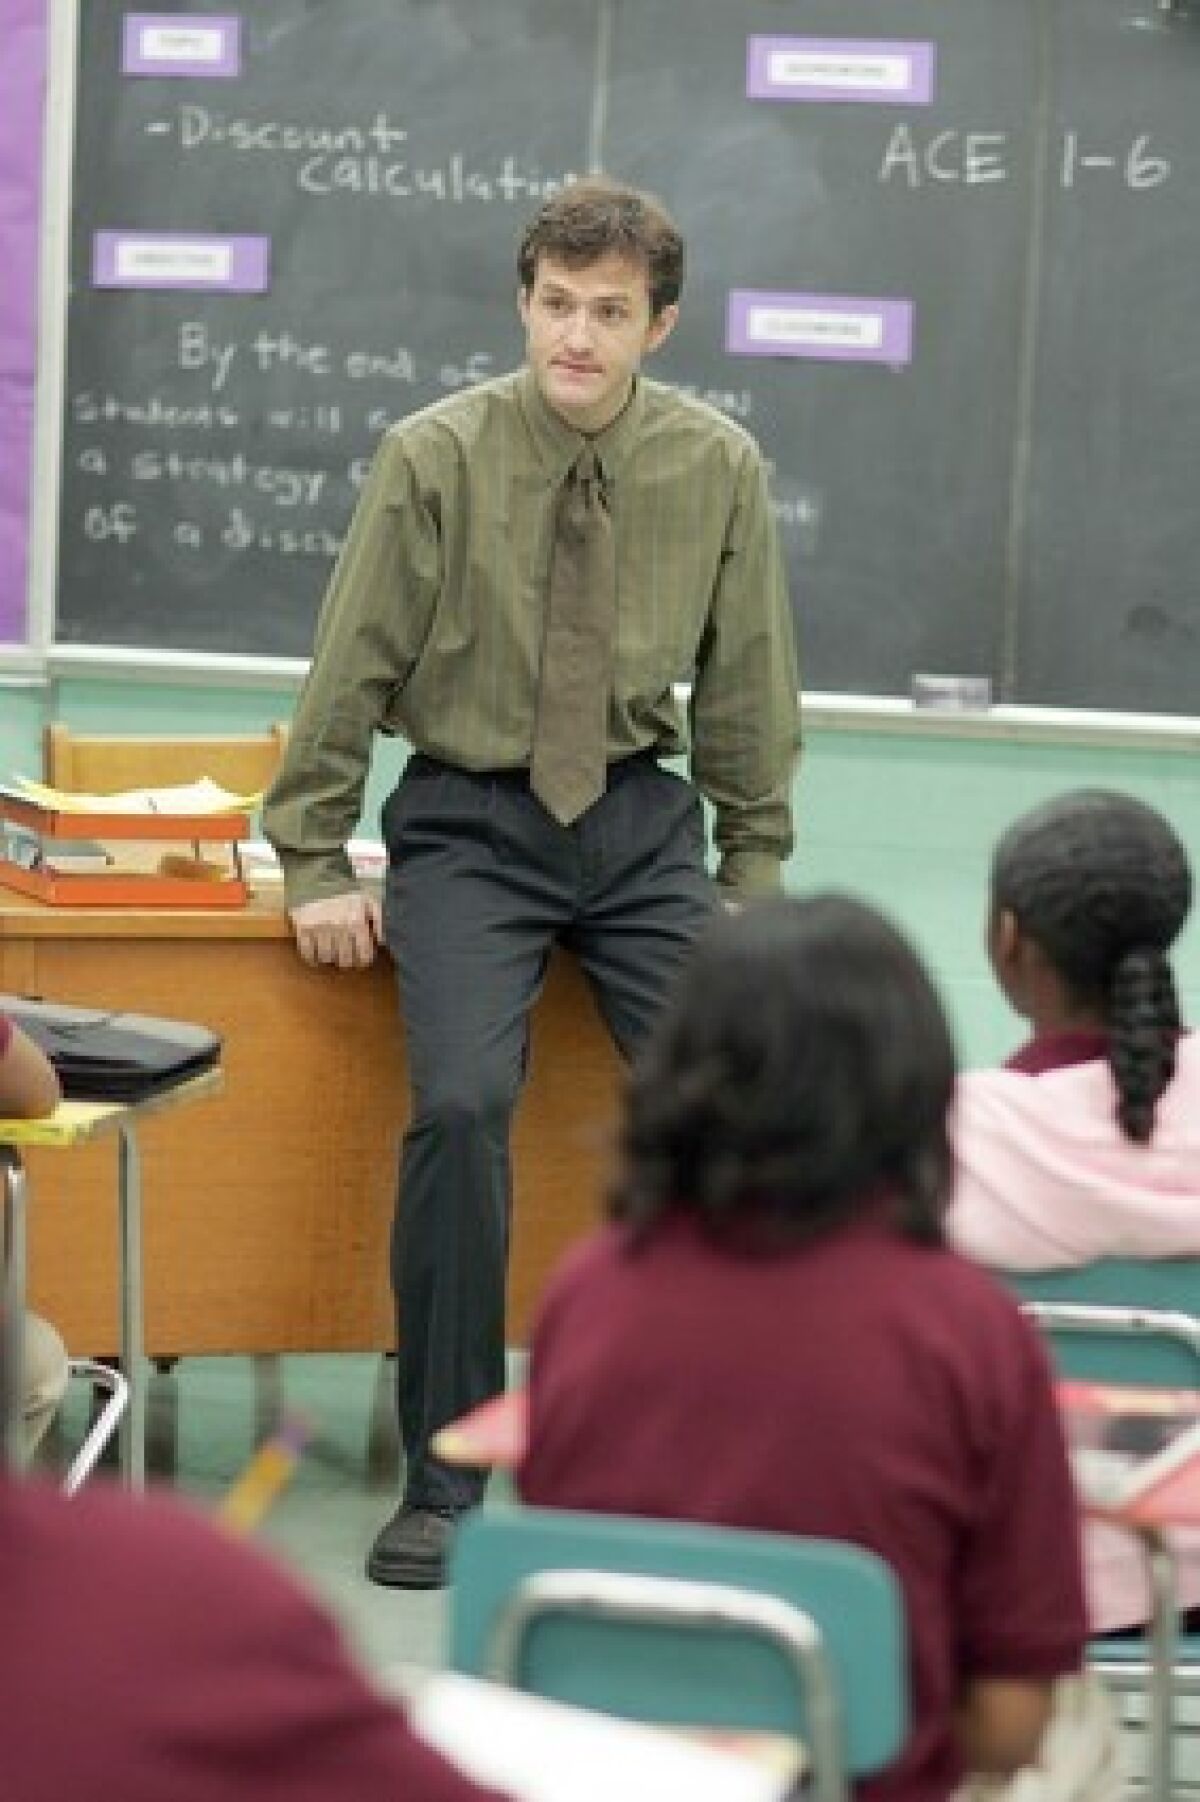 "The Wire's" fourth season in 2006 chronicled Det. Pryzbylewski's (Jim True-Frost) transition to teaching at an inner city school.